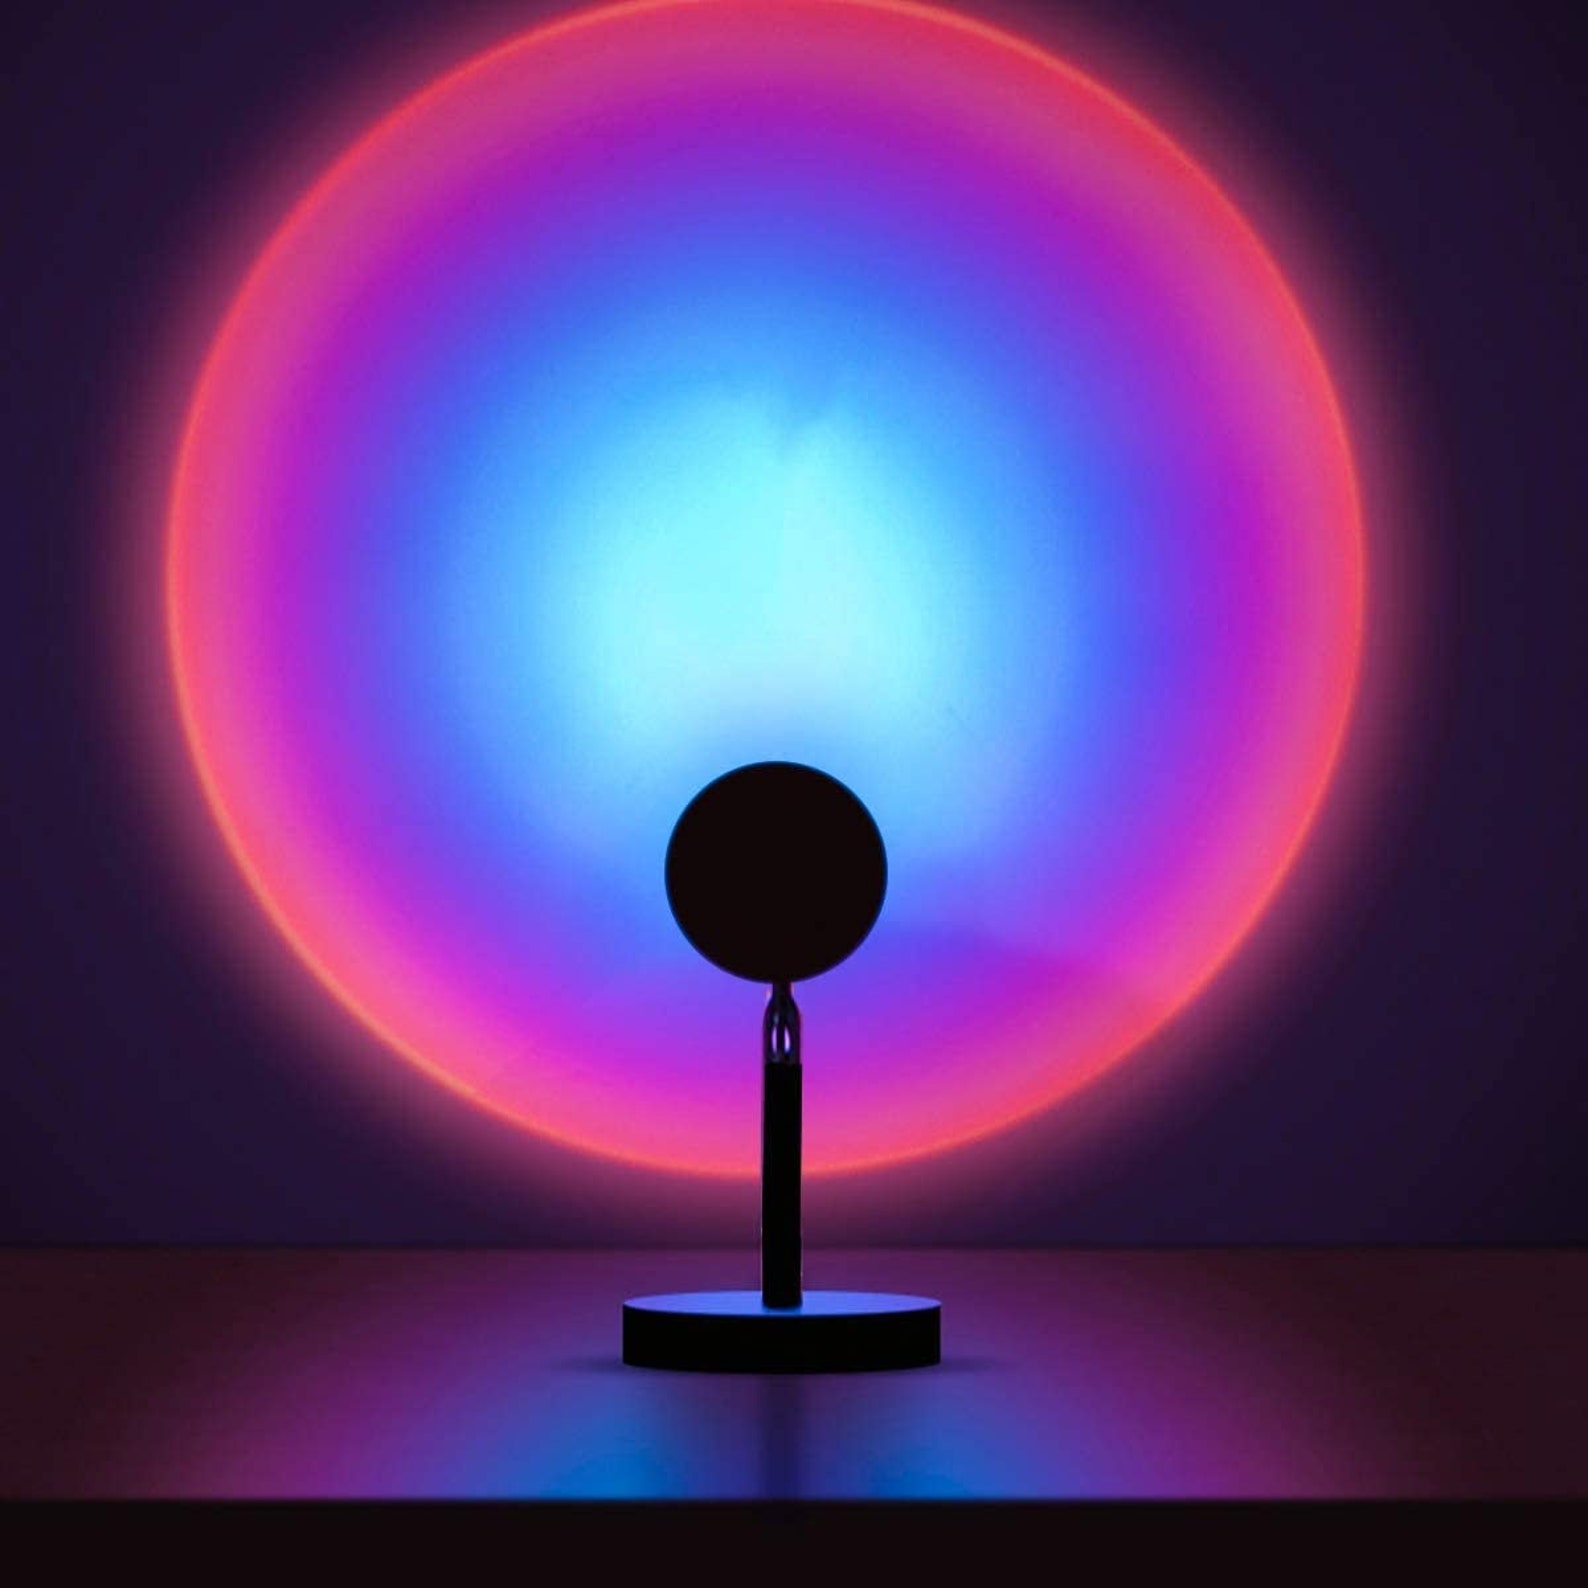 Sunset Lamp Projector - Sunset Projector Lamp 🌅 50% OFF NOW! 🌅